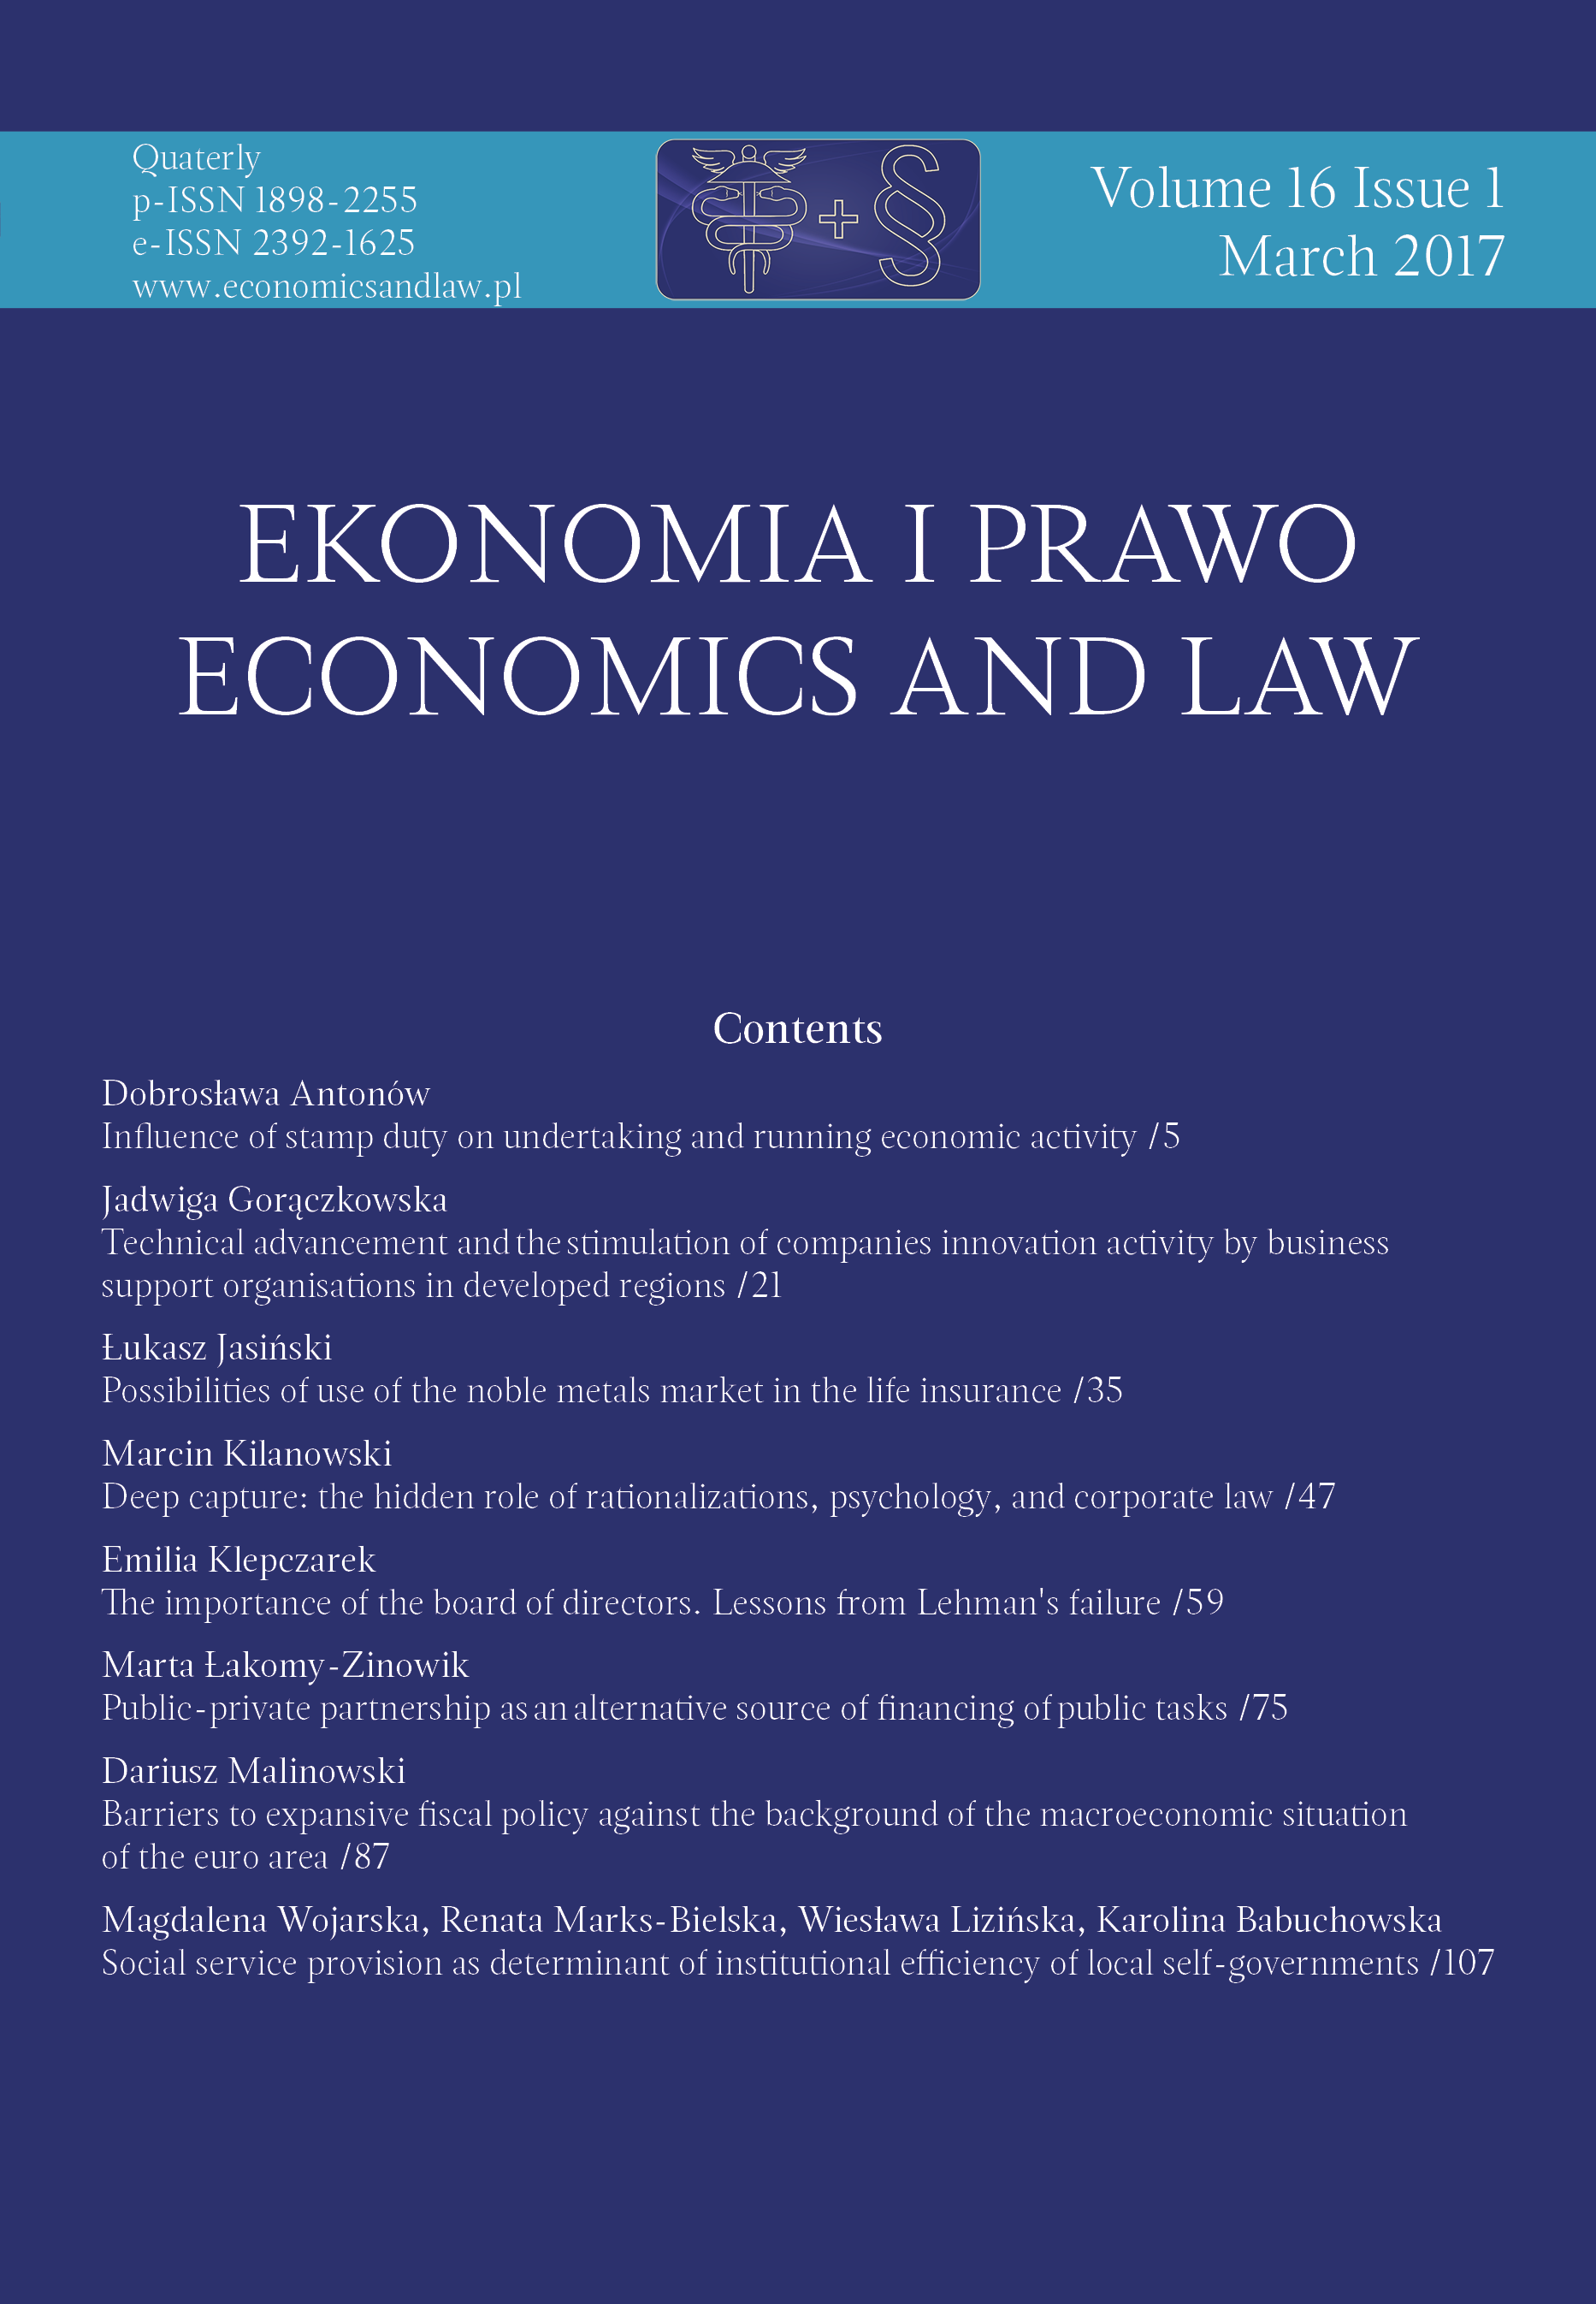 Barriers to expansive fiscal policy against the background of the macroeconomic situation of the euro area